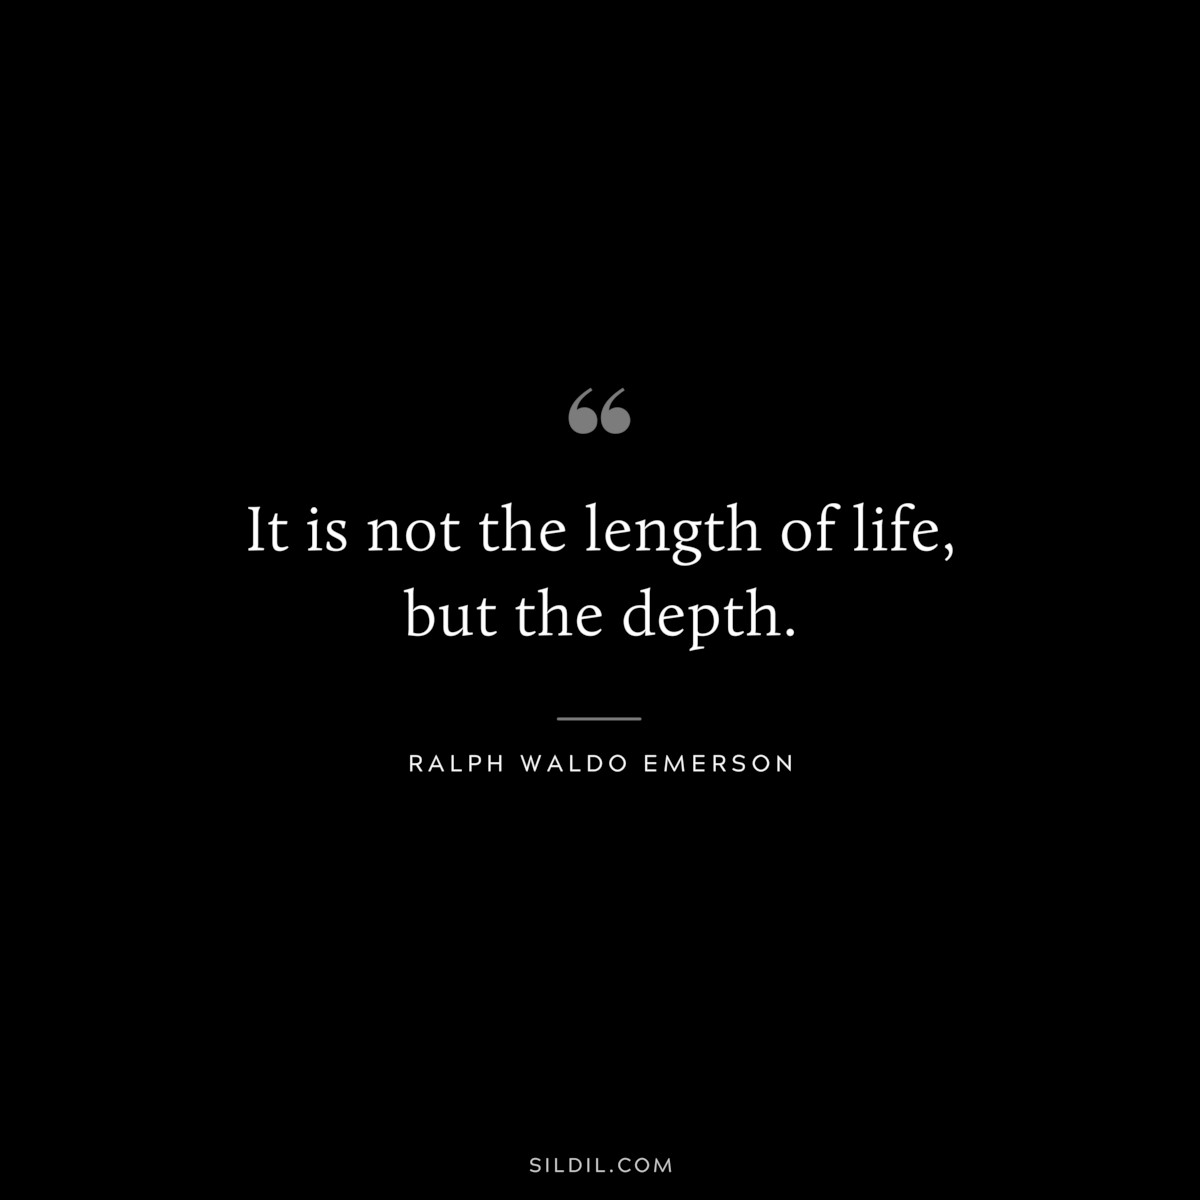 It is not the length of life, but the depth. — Ralph Waldo Emerson